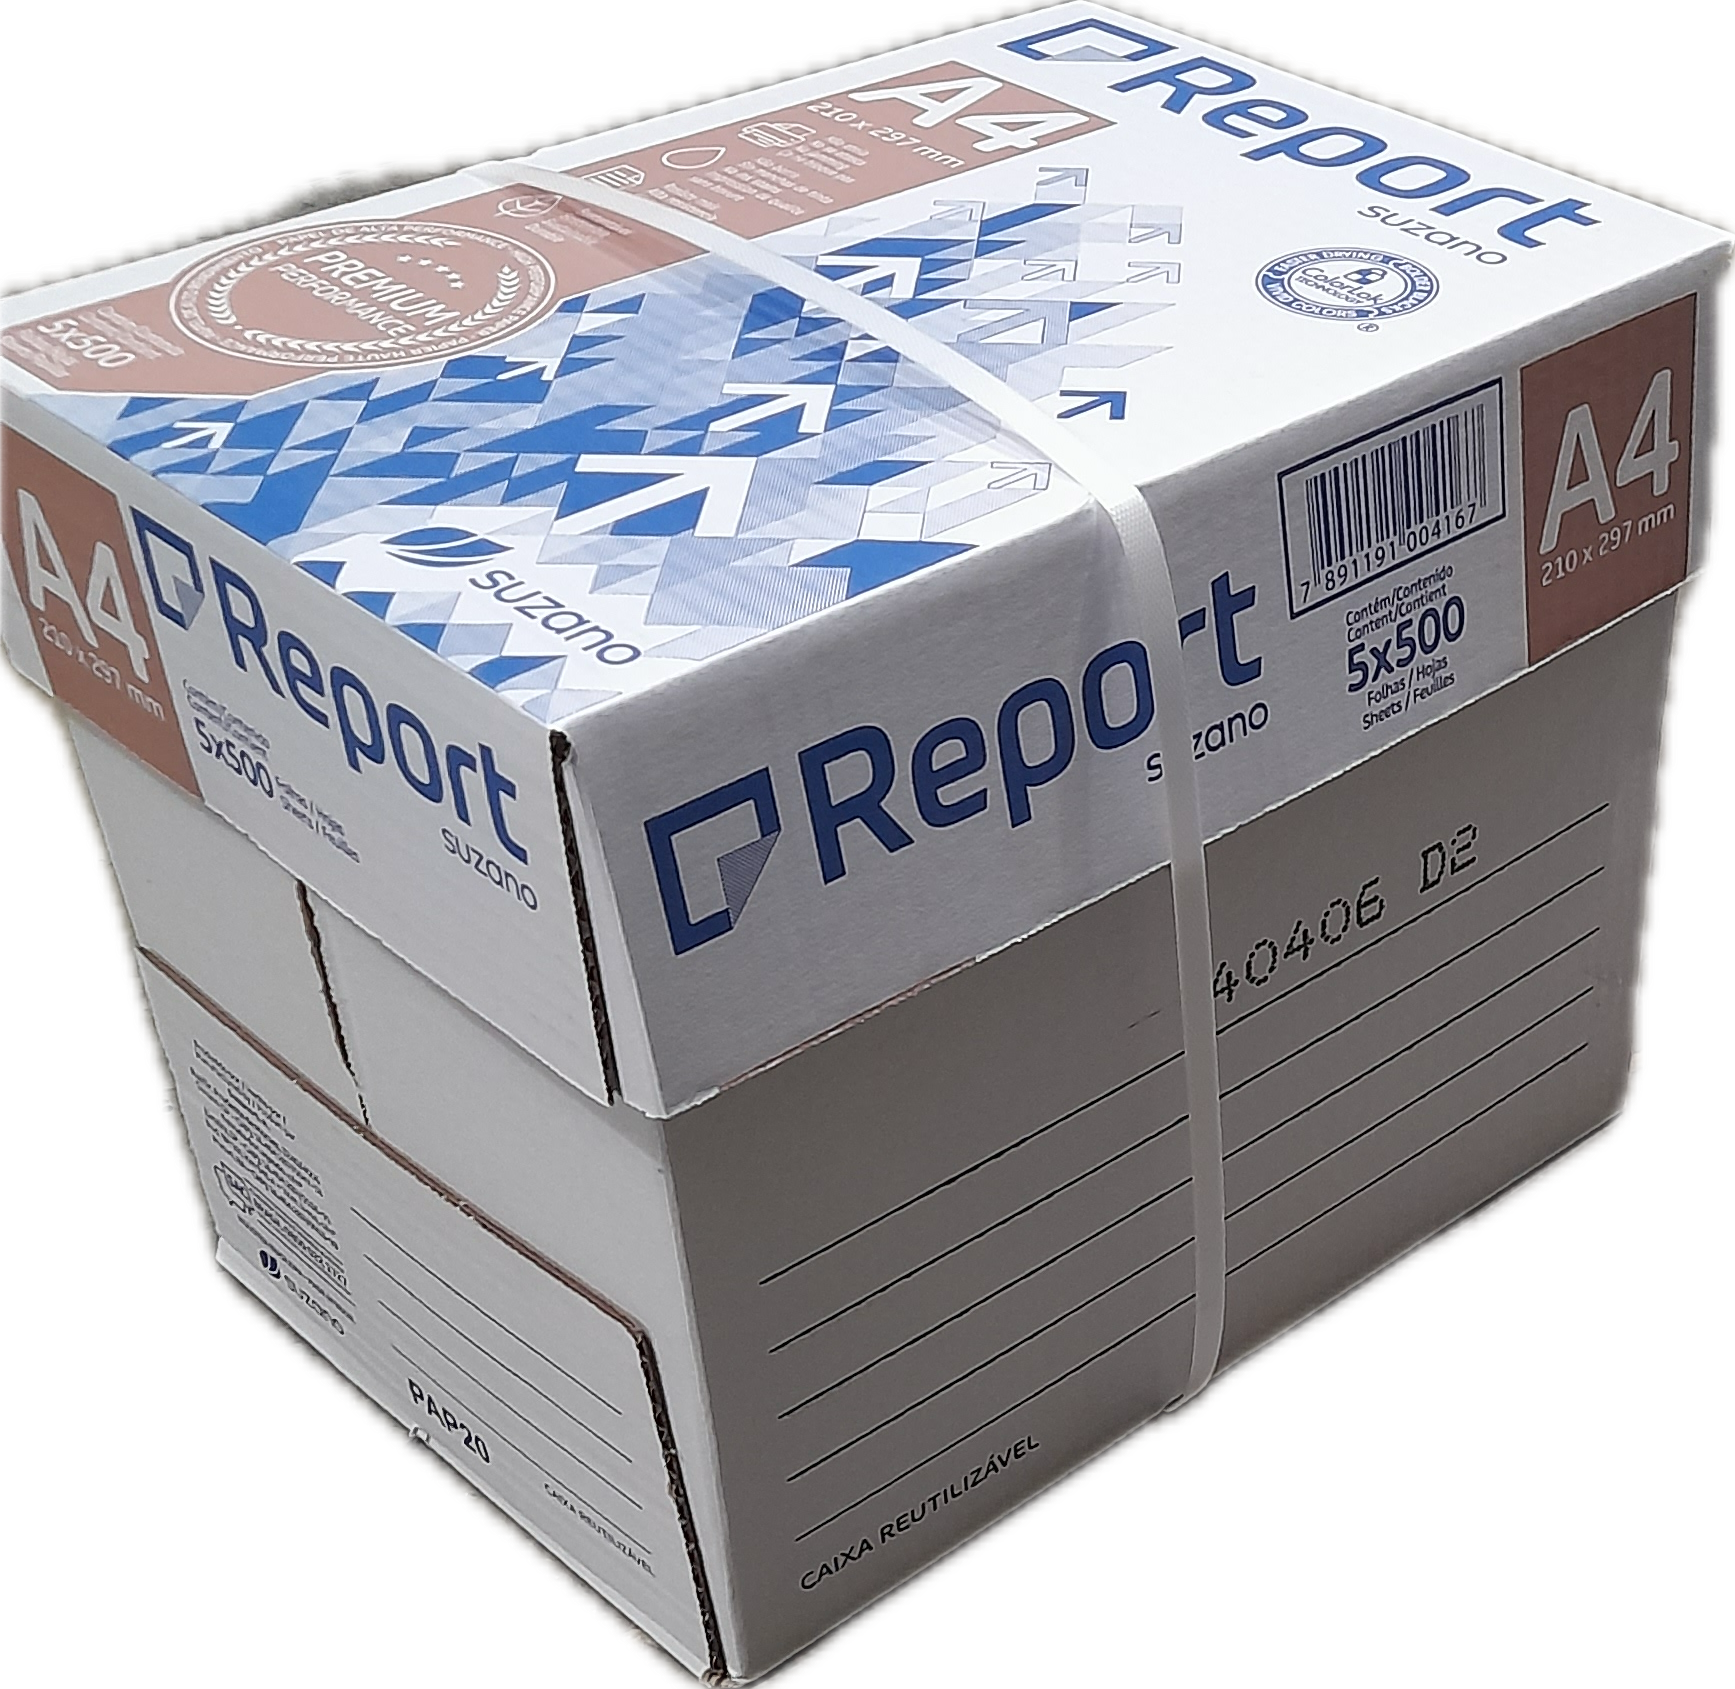 A4 Paper Rep 2500 sheets 1 Box of 5 ream